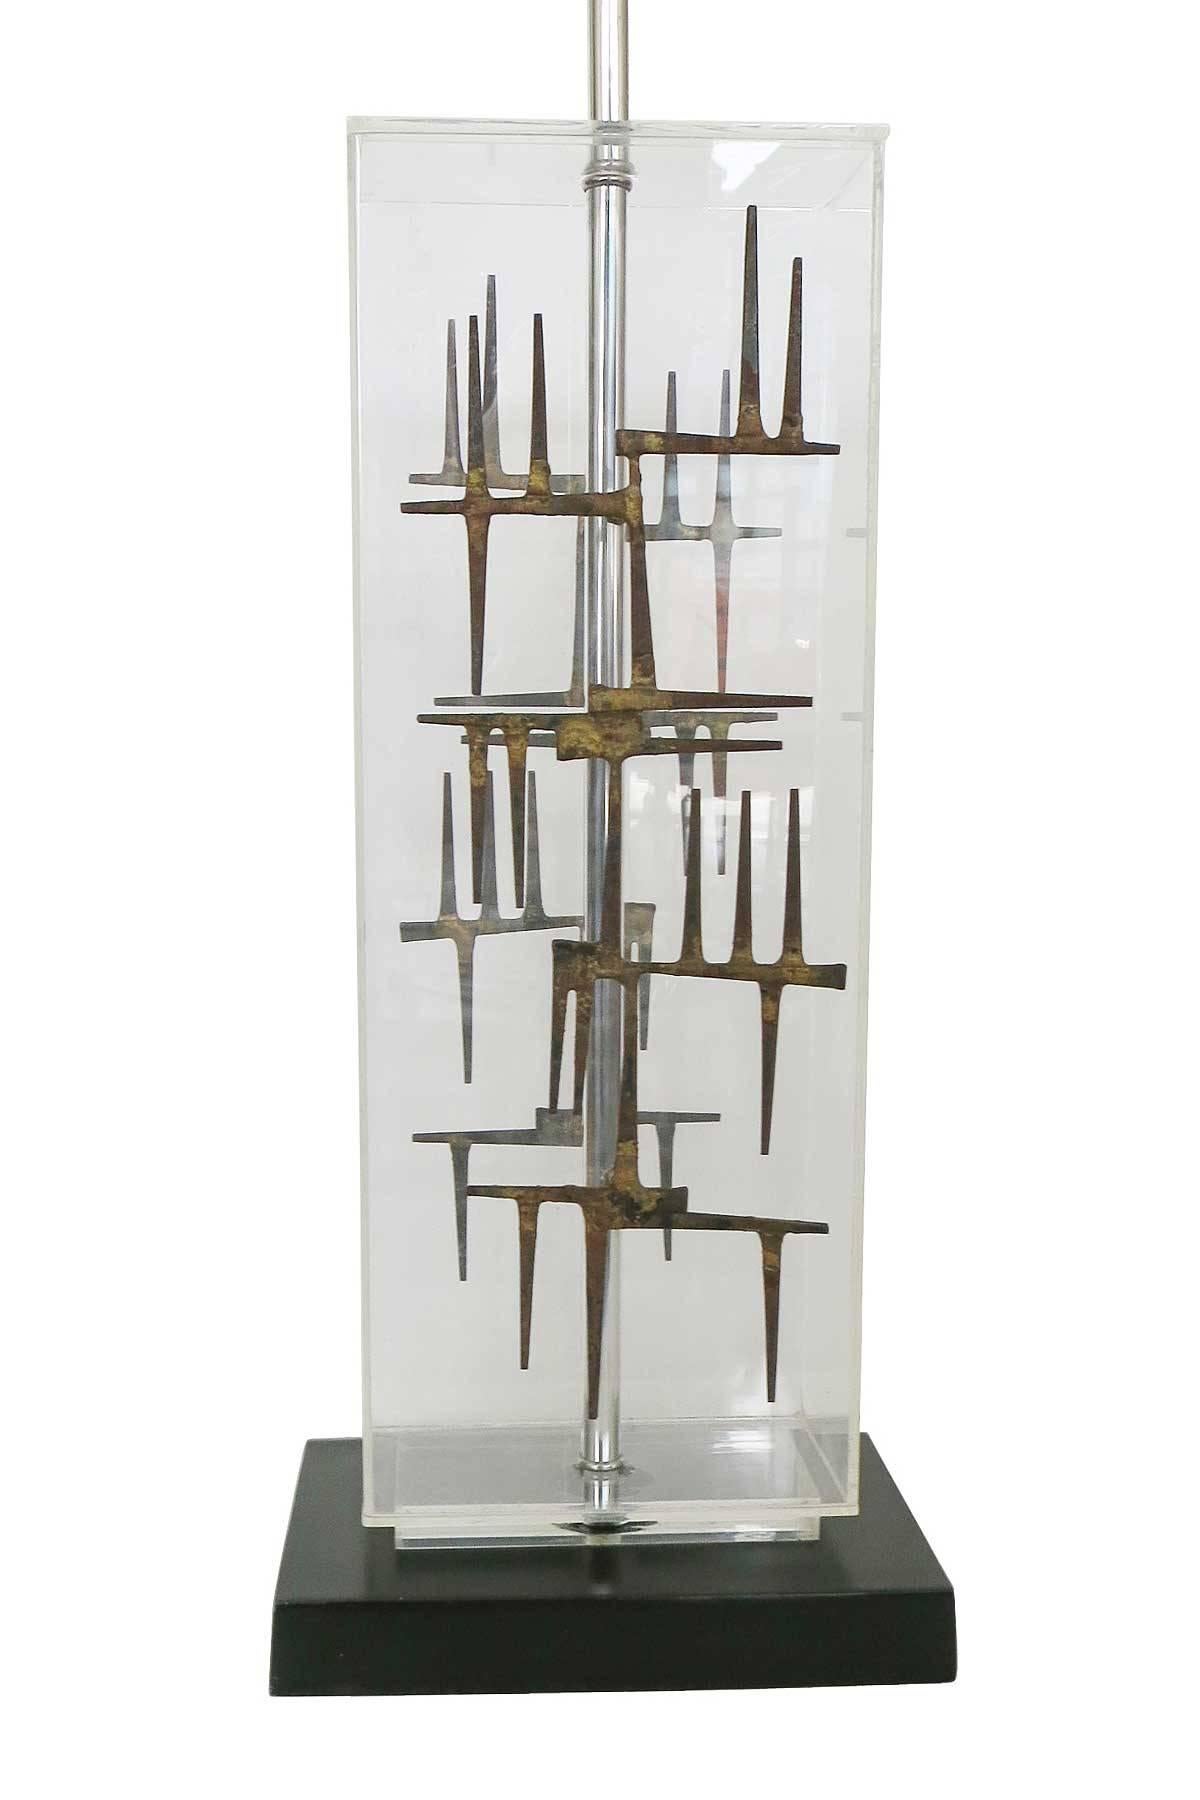 Brutalist nail sculpture Lucite table lamp, circa 1967 made by the Laurel Lamp Co.

This lamp features a hand welded nail sculpture fixed to an acrylic lamp base with a black lacquer base.